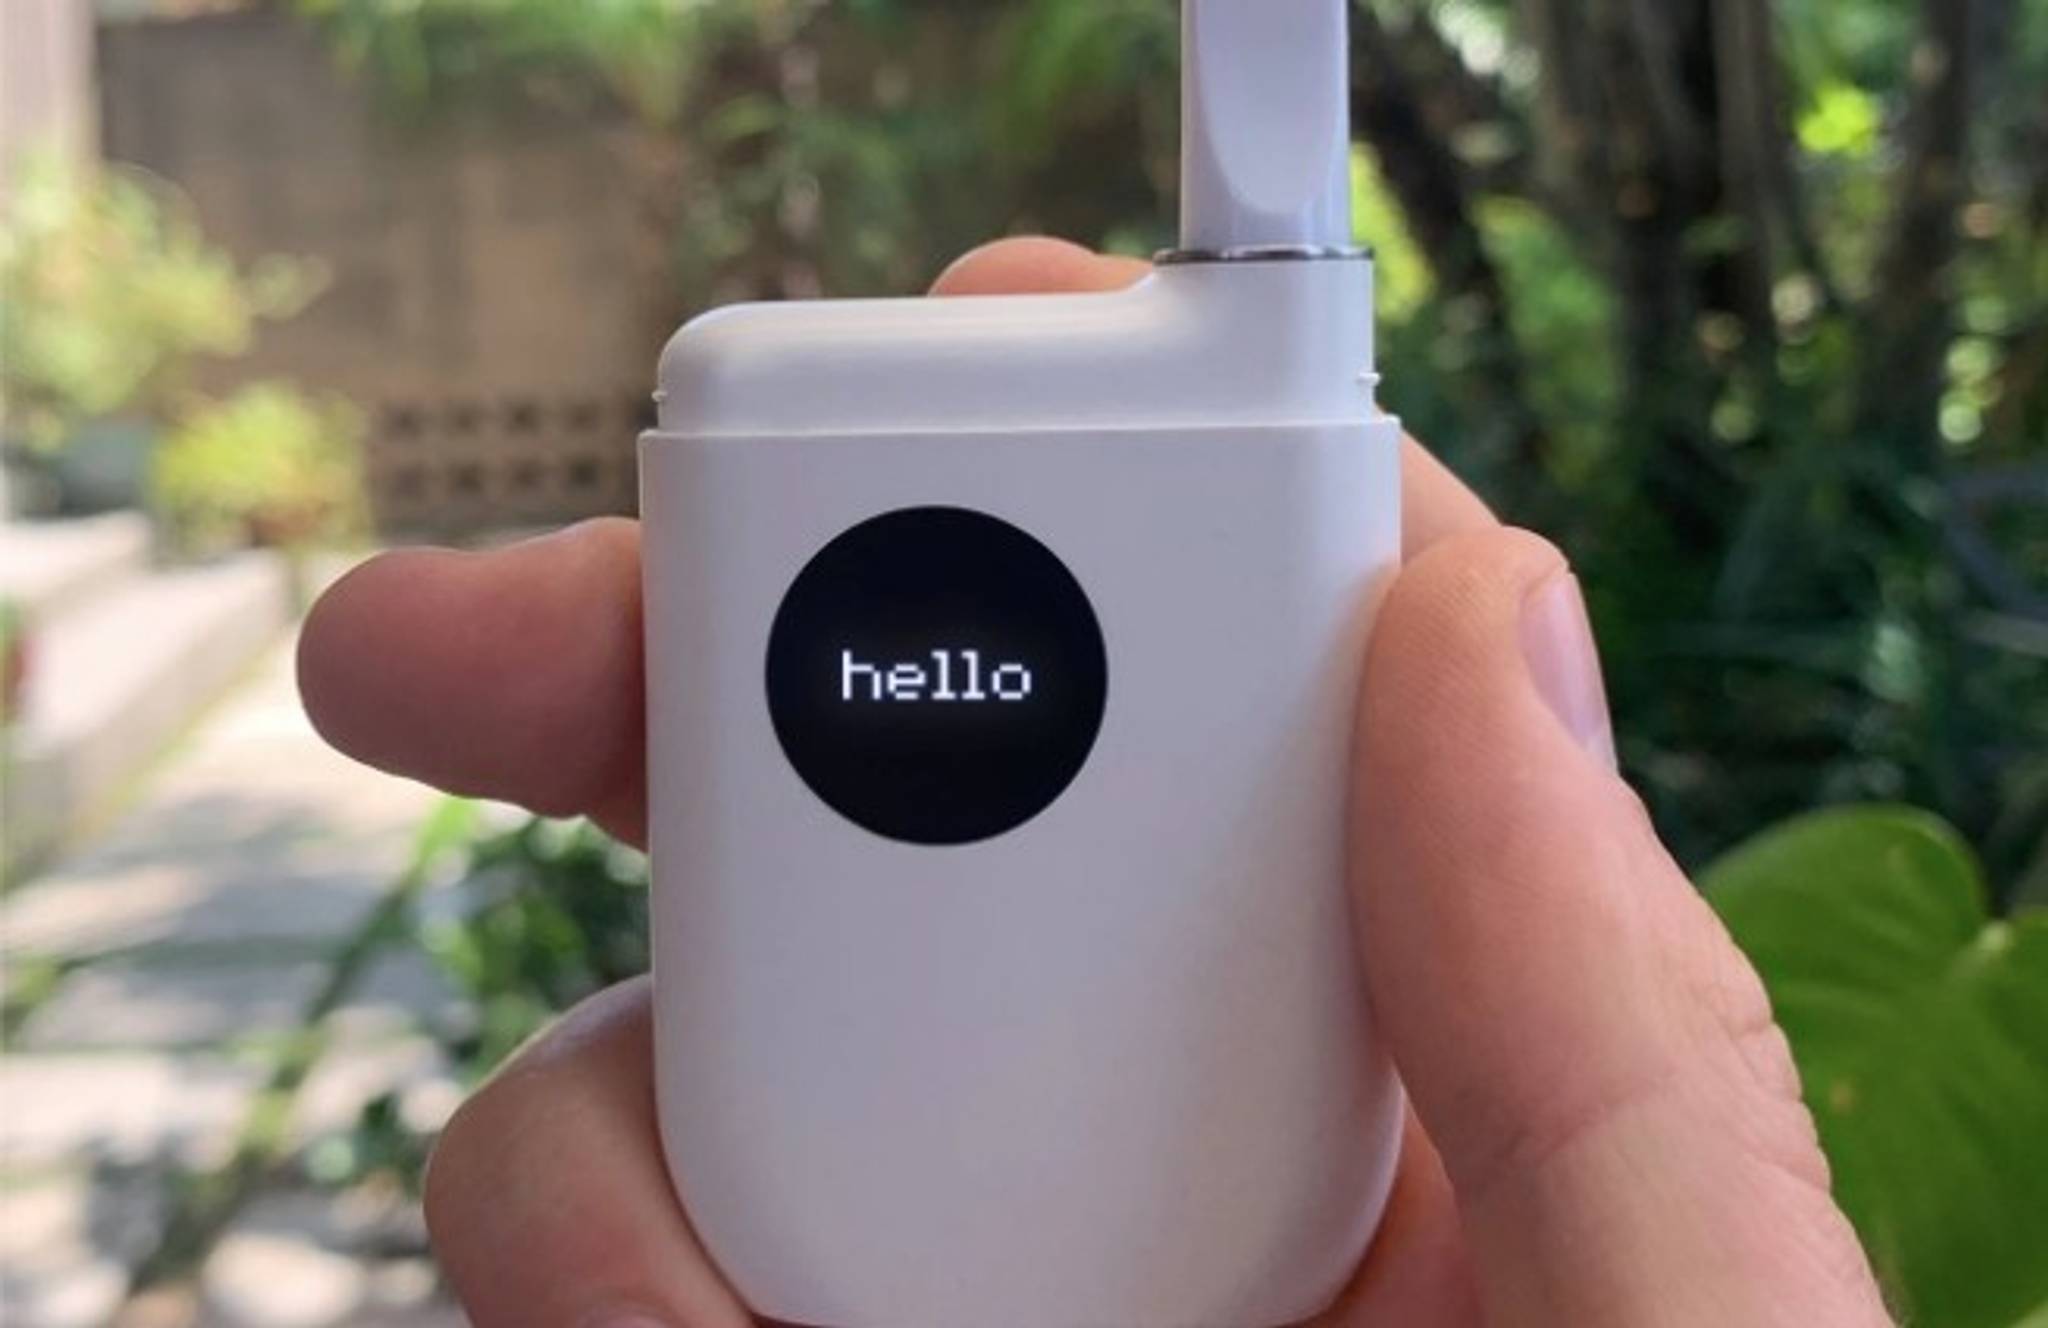 Mode’s dosage device adds precision to getting high